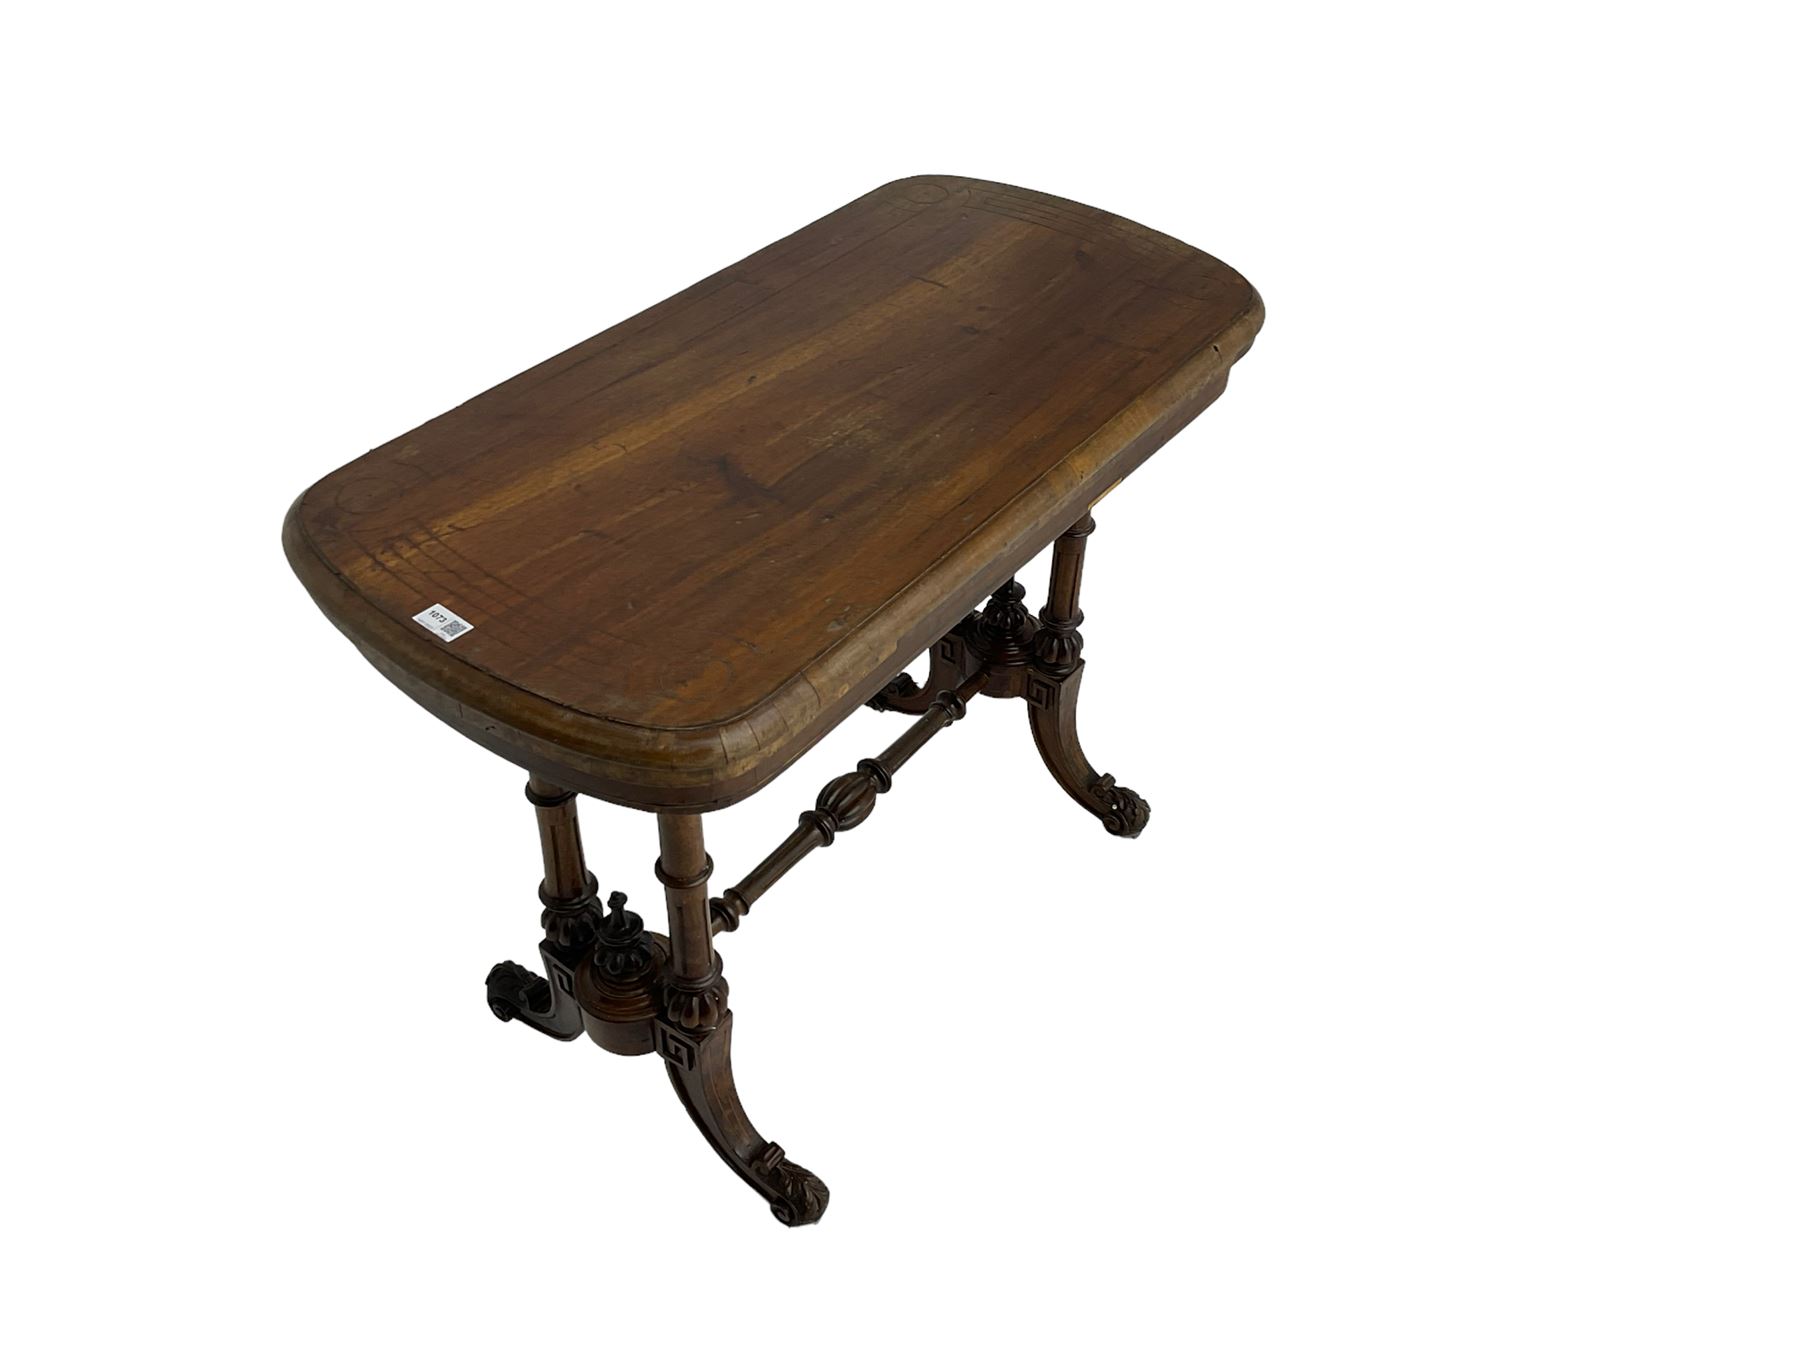 Victorian walnut stretcher side table - Image 4 of 6